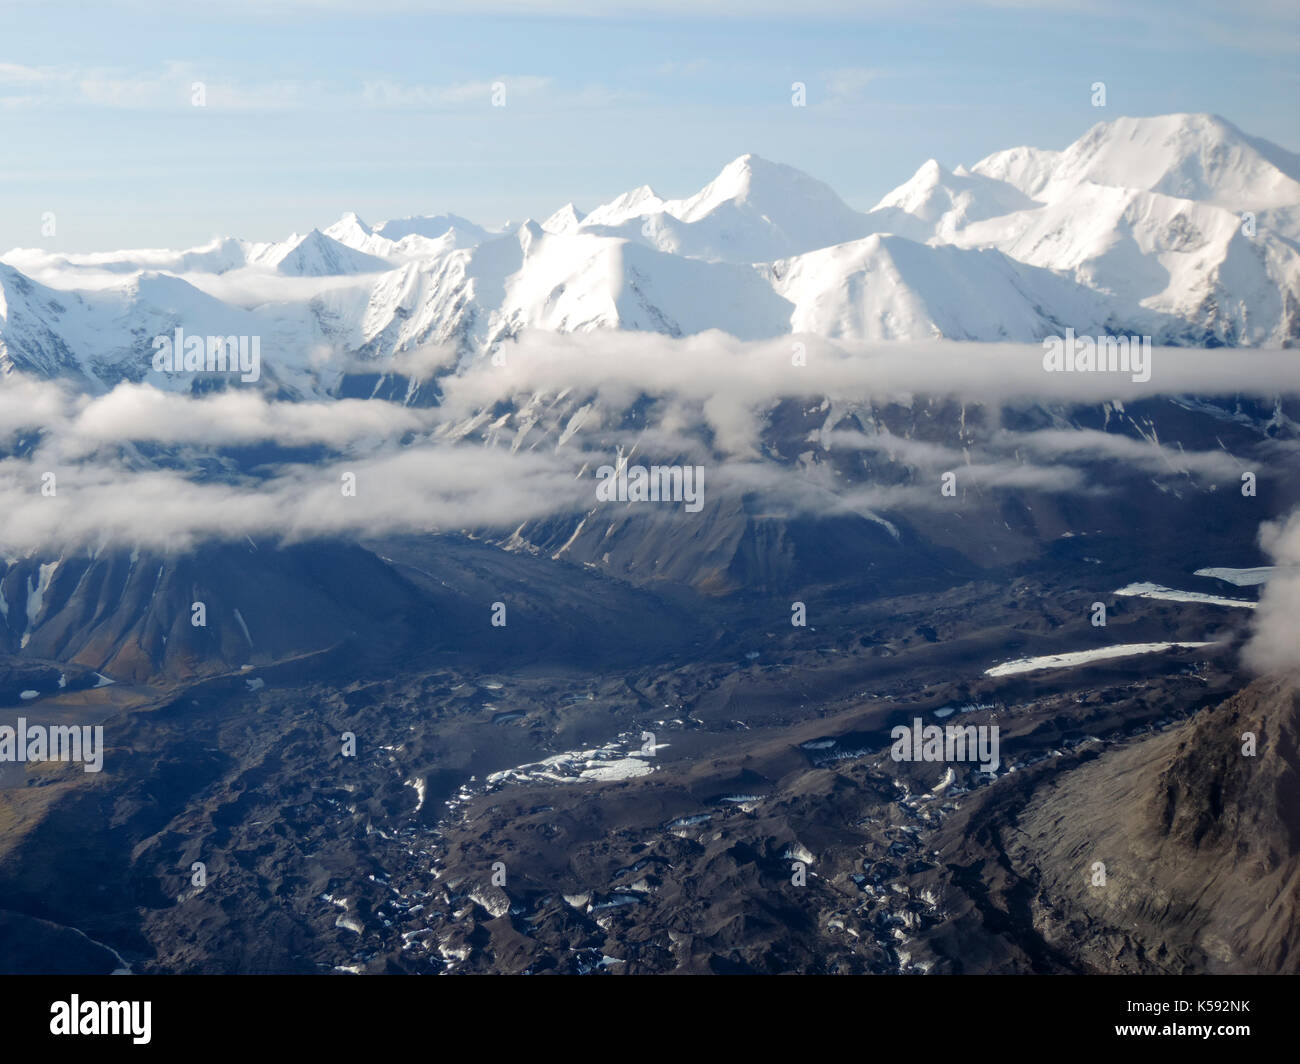 Aerial View Of Snow Capped Mountains And Clouds Alaska Stock Photo Alamy